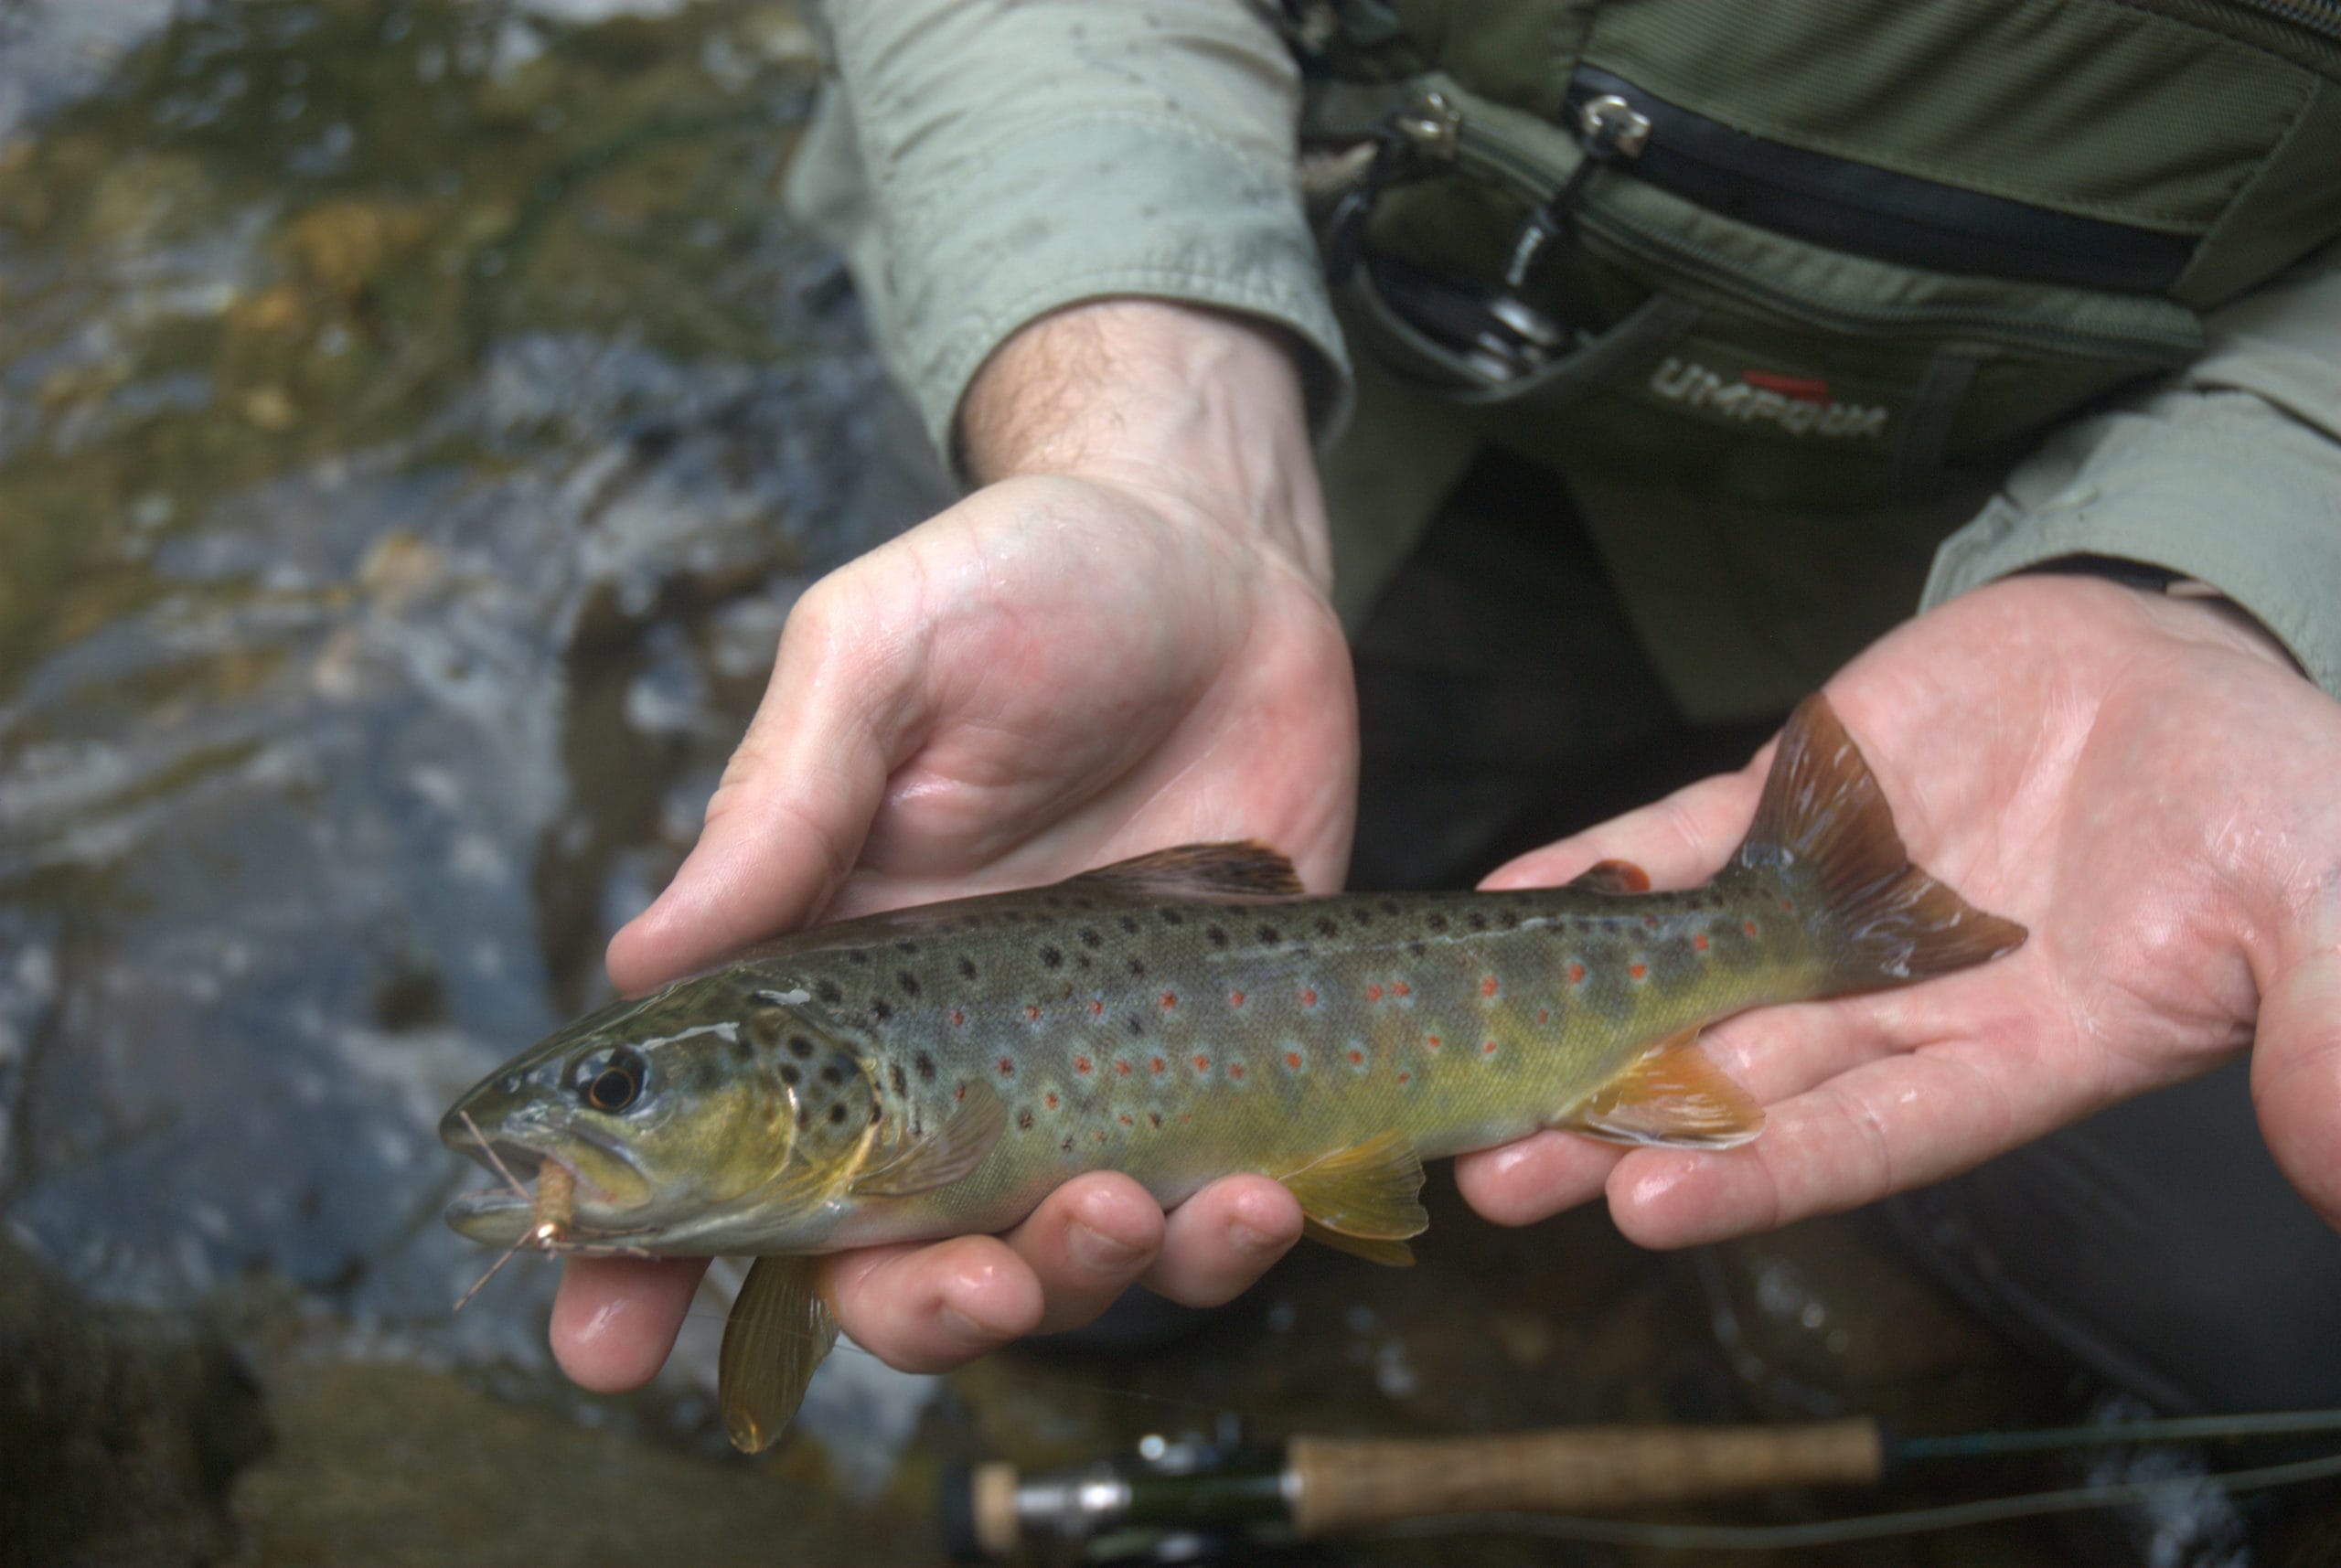 Brown trout like this will often take nymphs fished sub-surface.